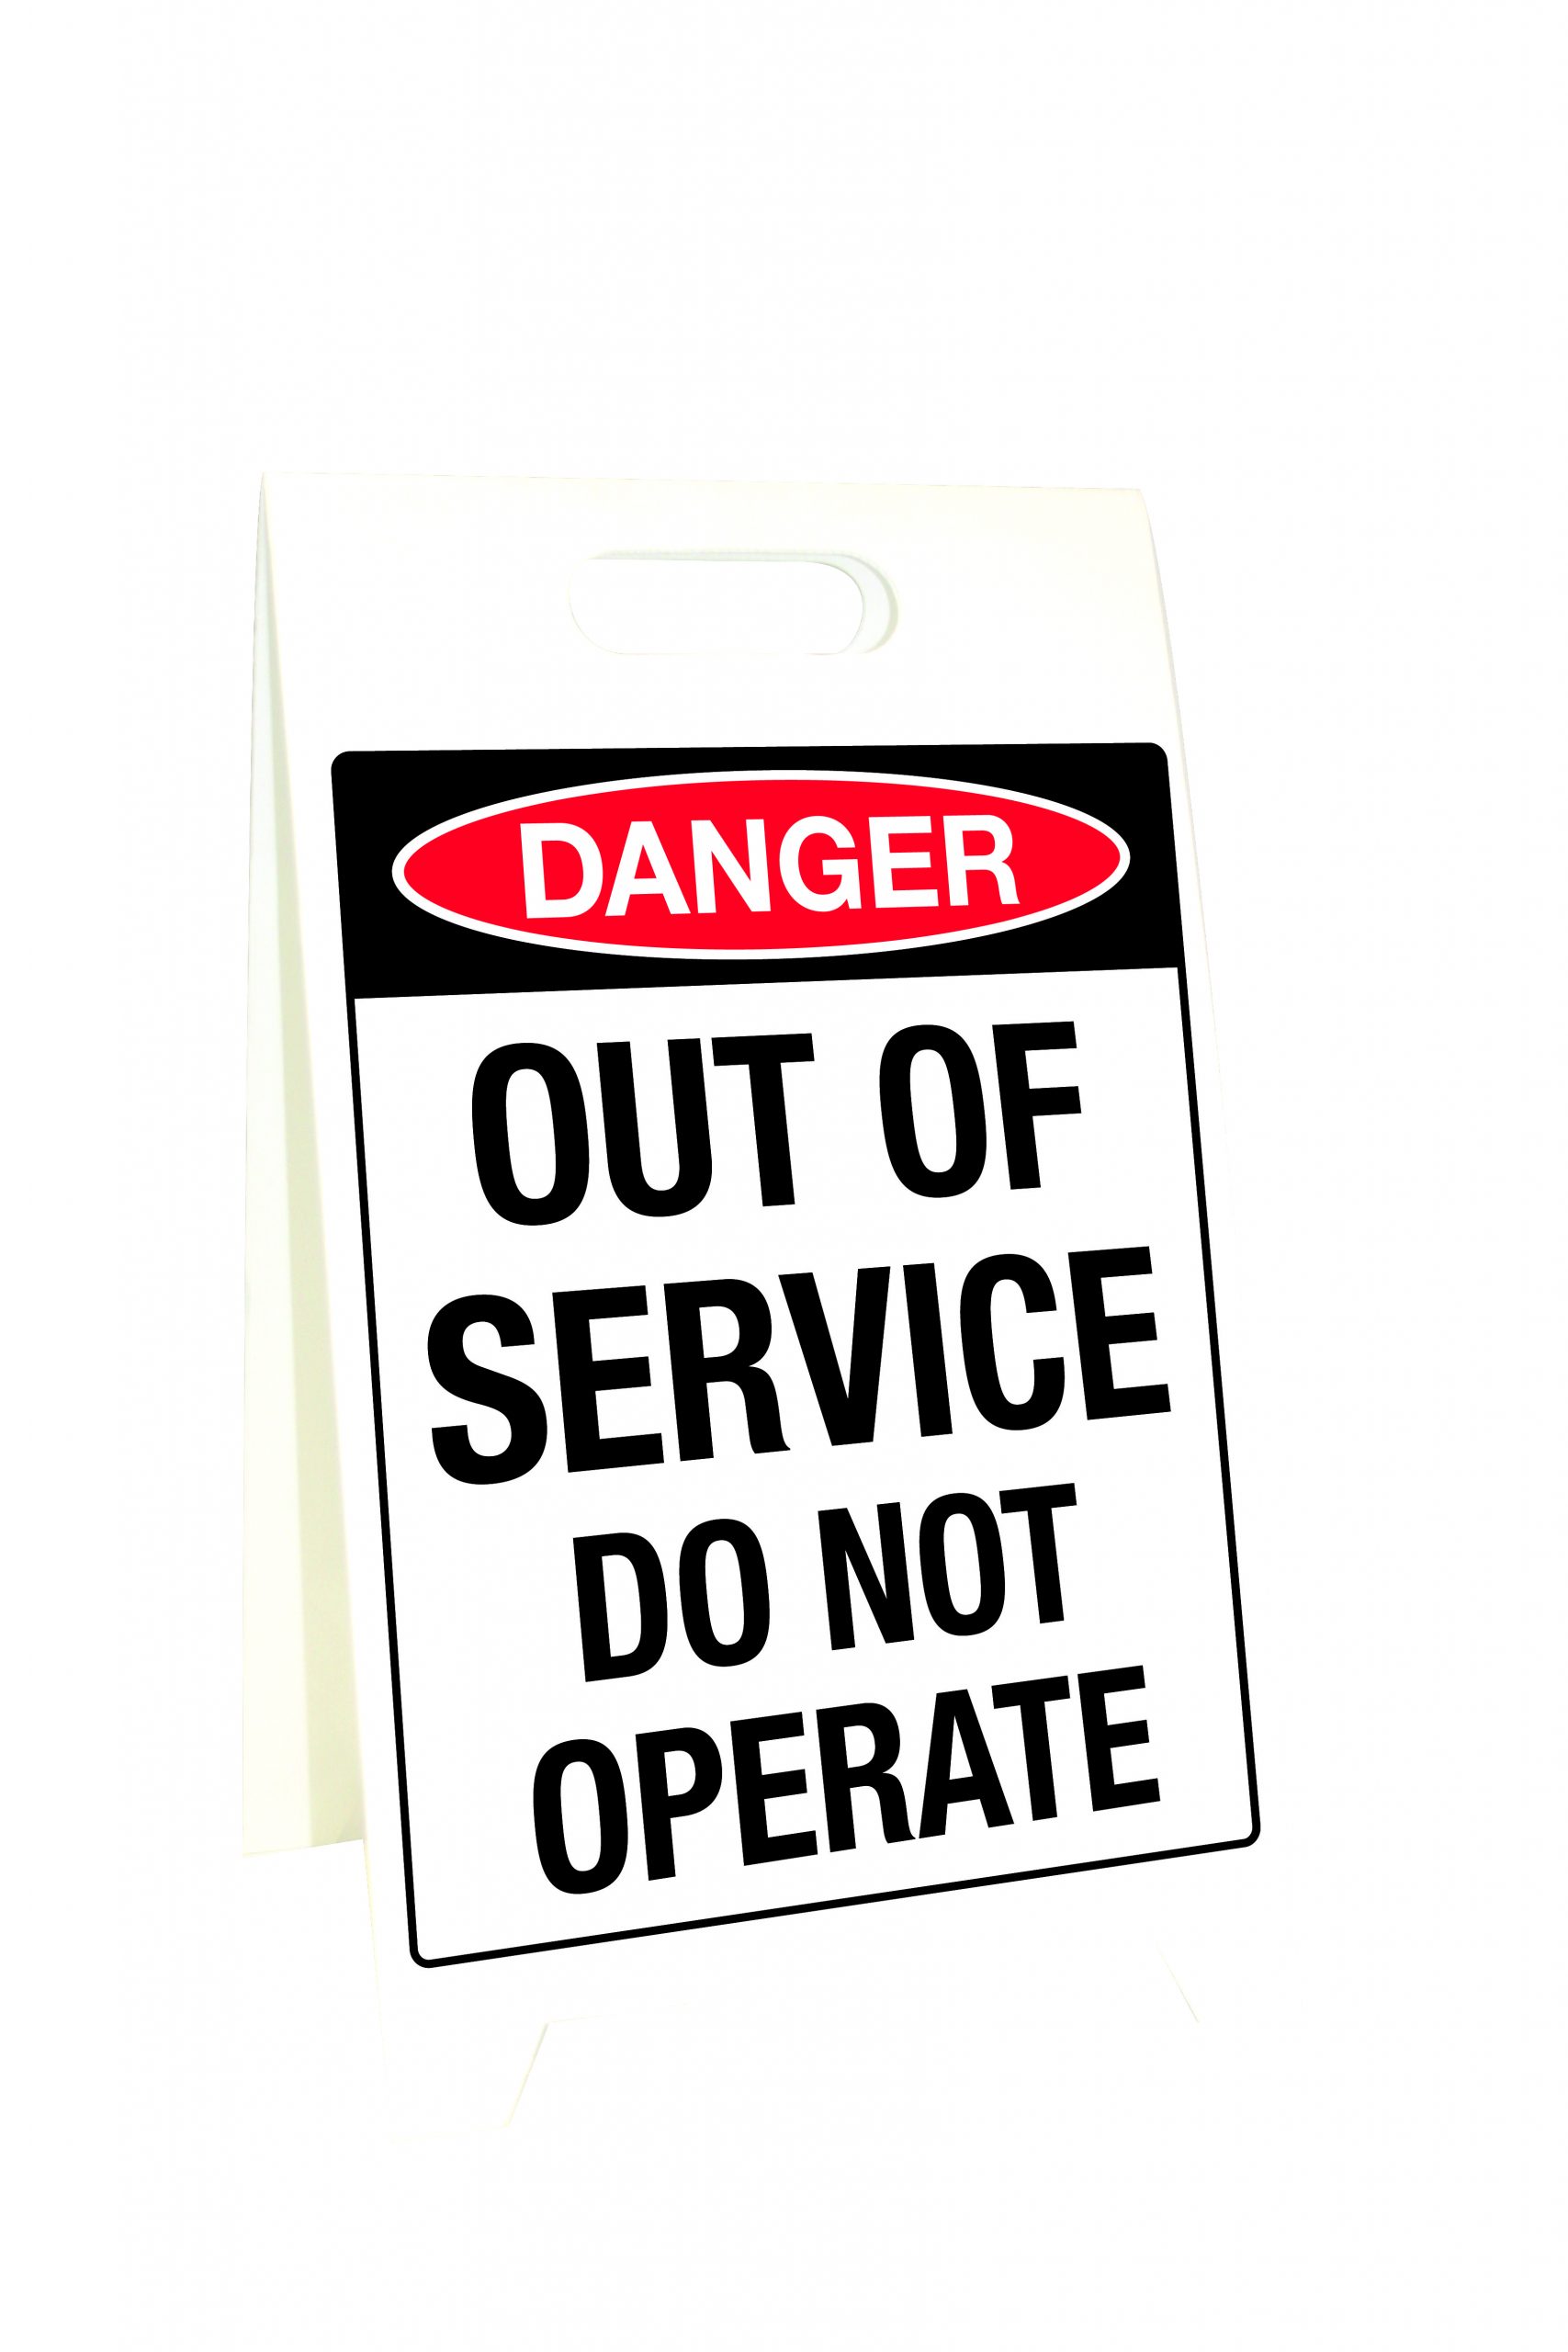 UNIFORM SAFETY 500X300MM CORFLUTE SIGN STANDS DANGER OUT OF SERVICE DO